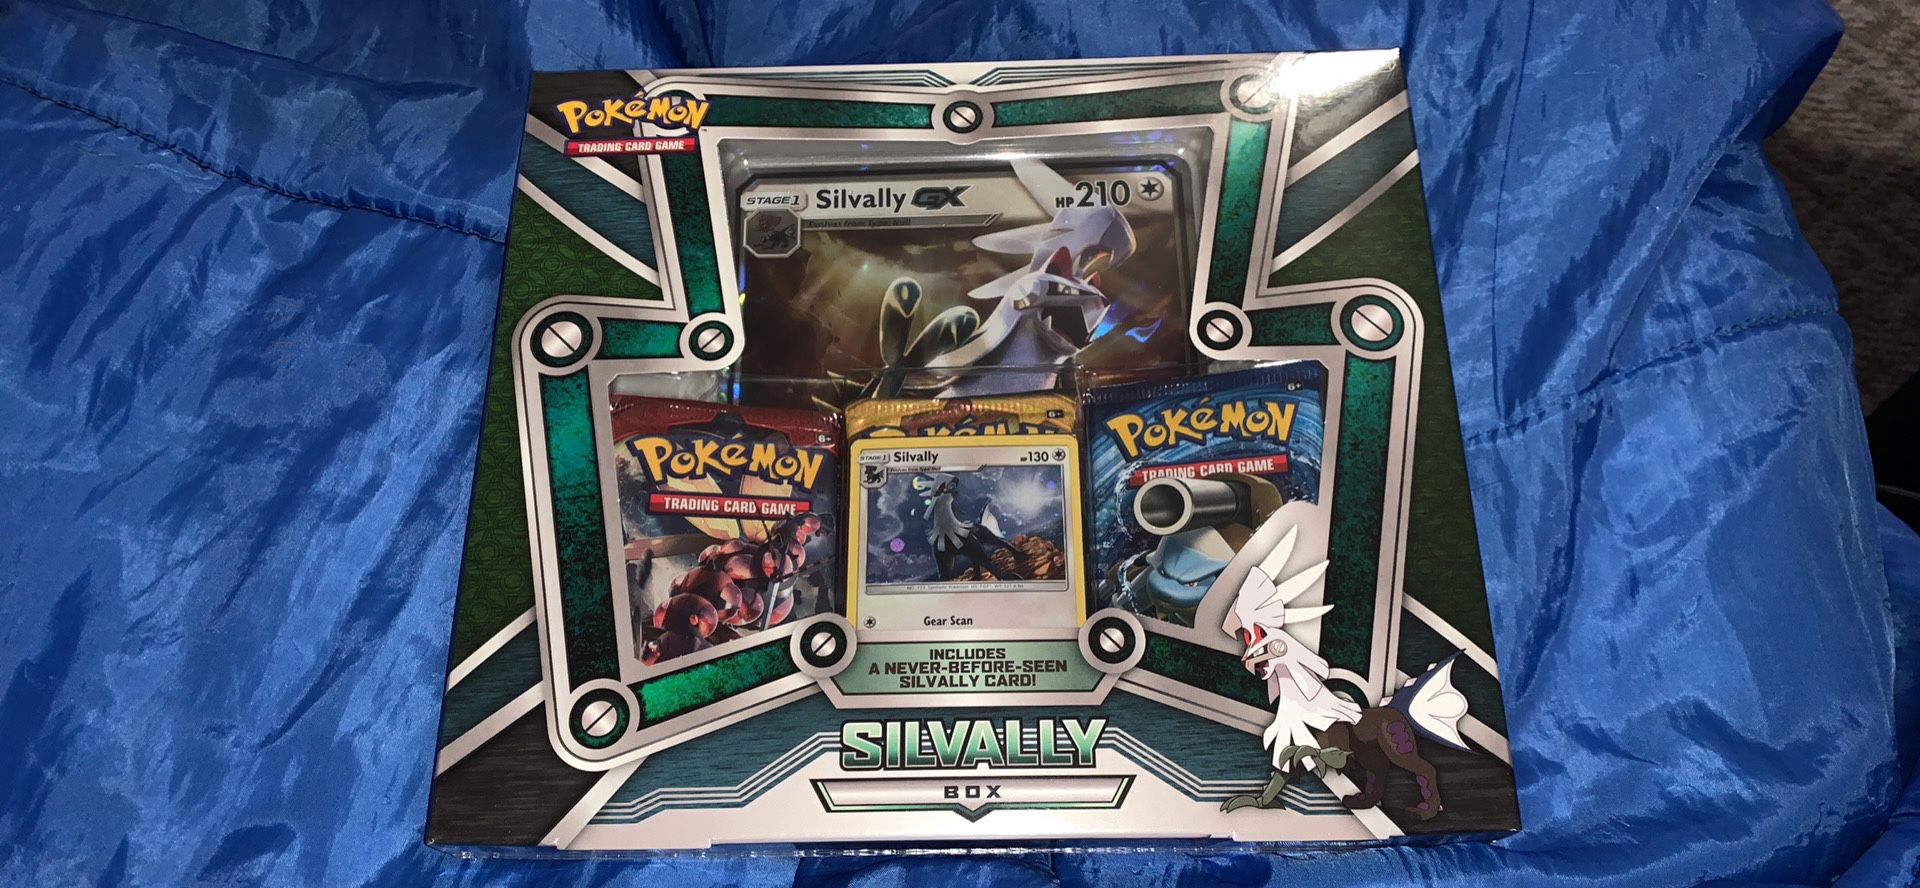 2 Pokemon Silvally Collection Box | New & Sealed | Inc Booster Packs + Promo Cards